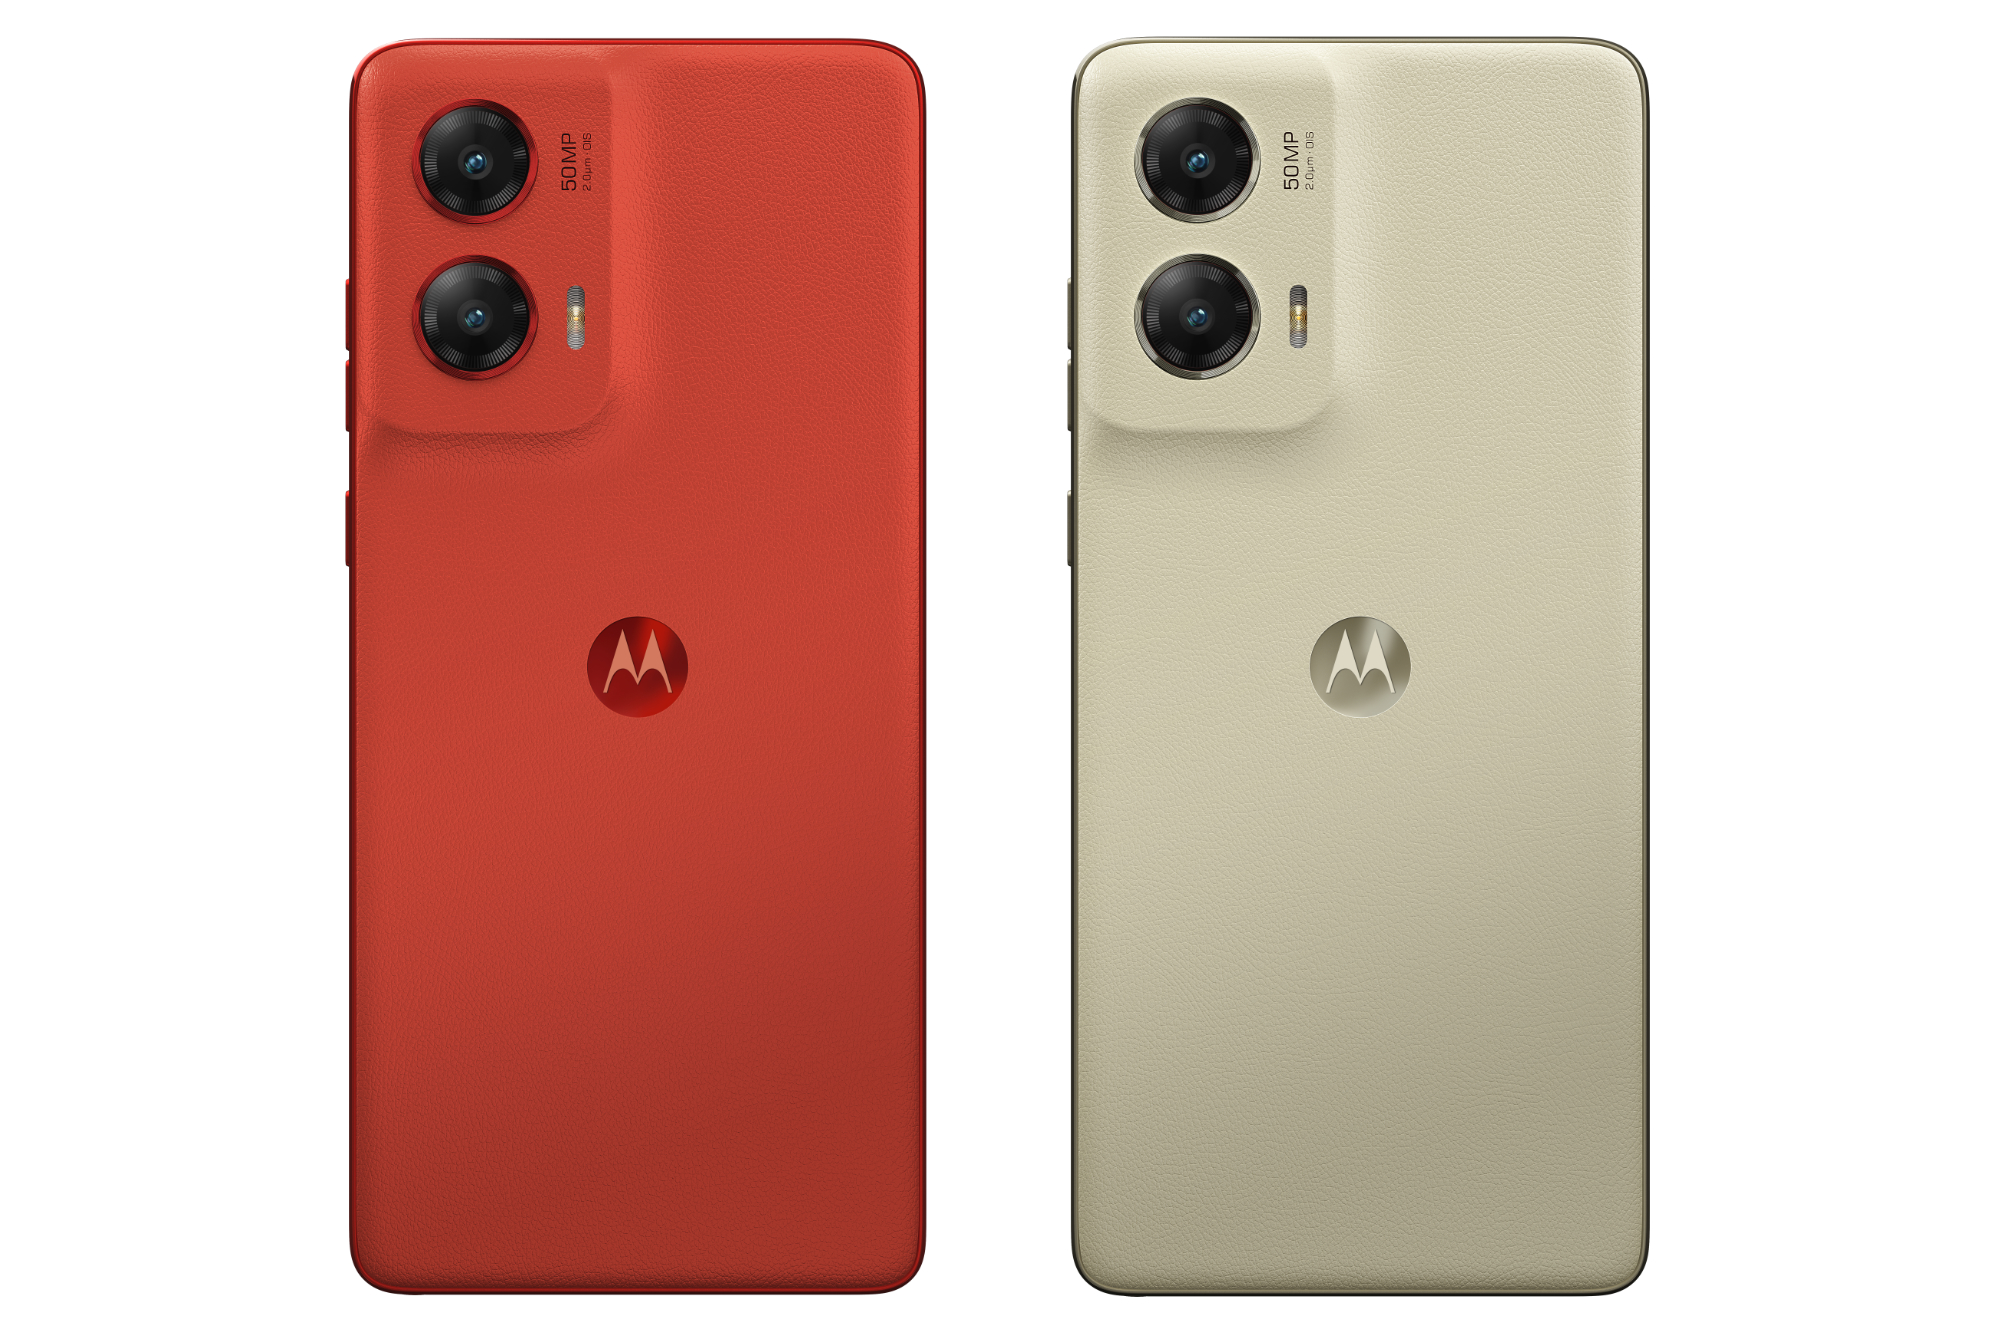 Renders of the Moto G Stylus 5G (2024) in its two colors: Scarlet Wave and Carmel Latte